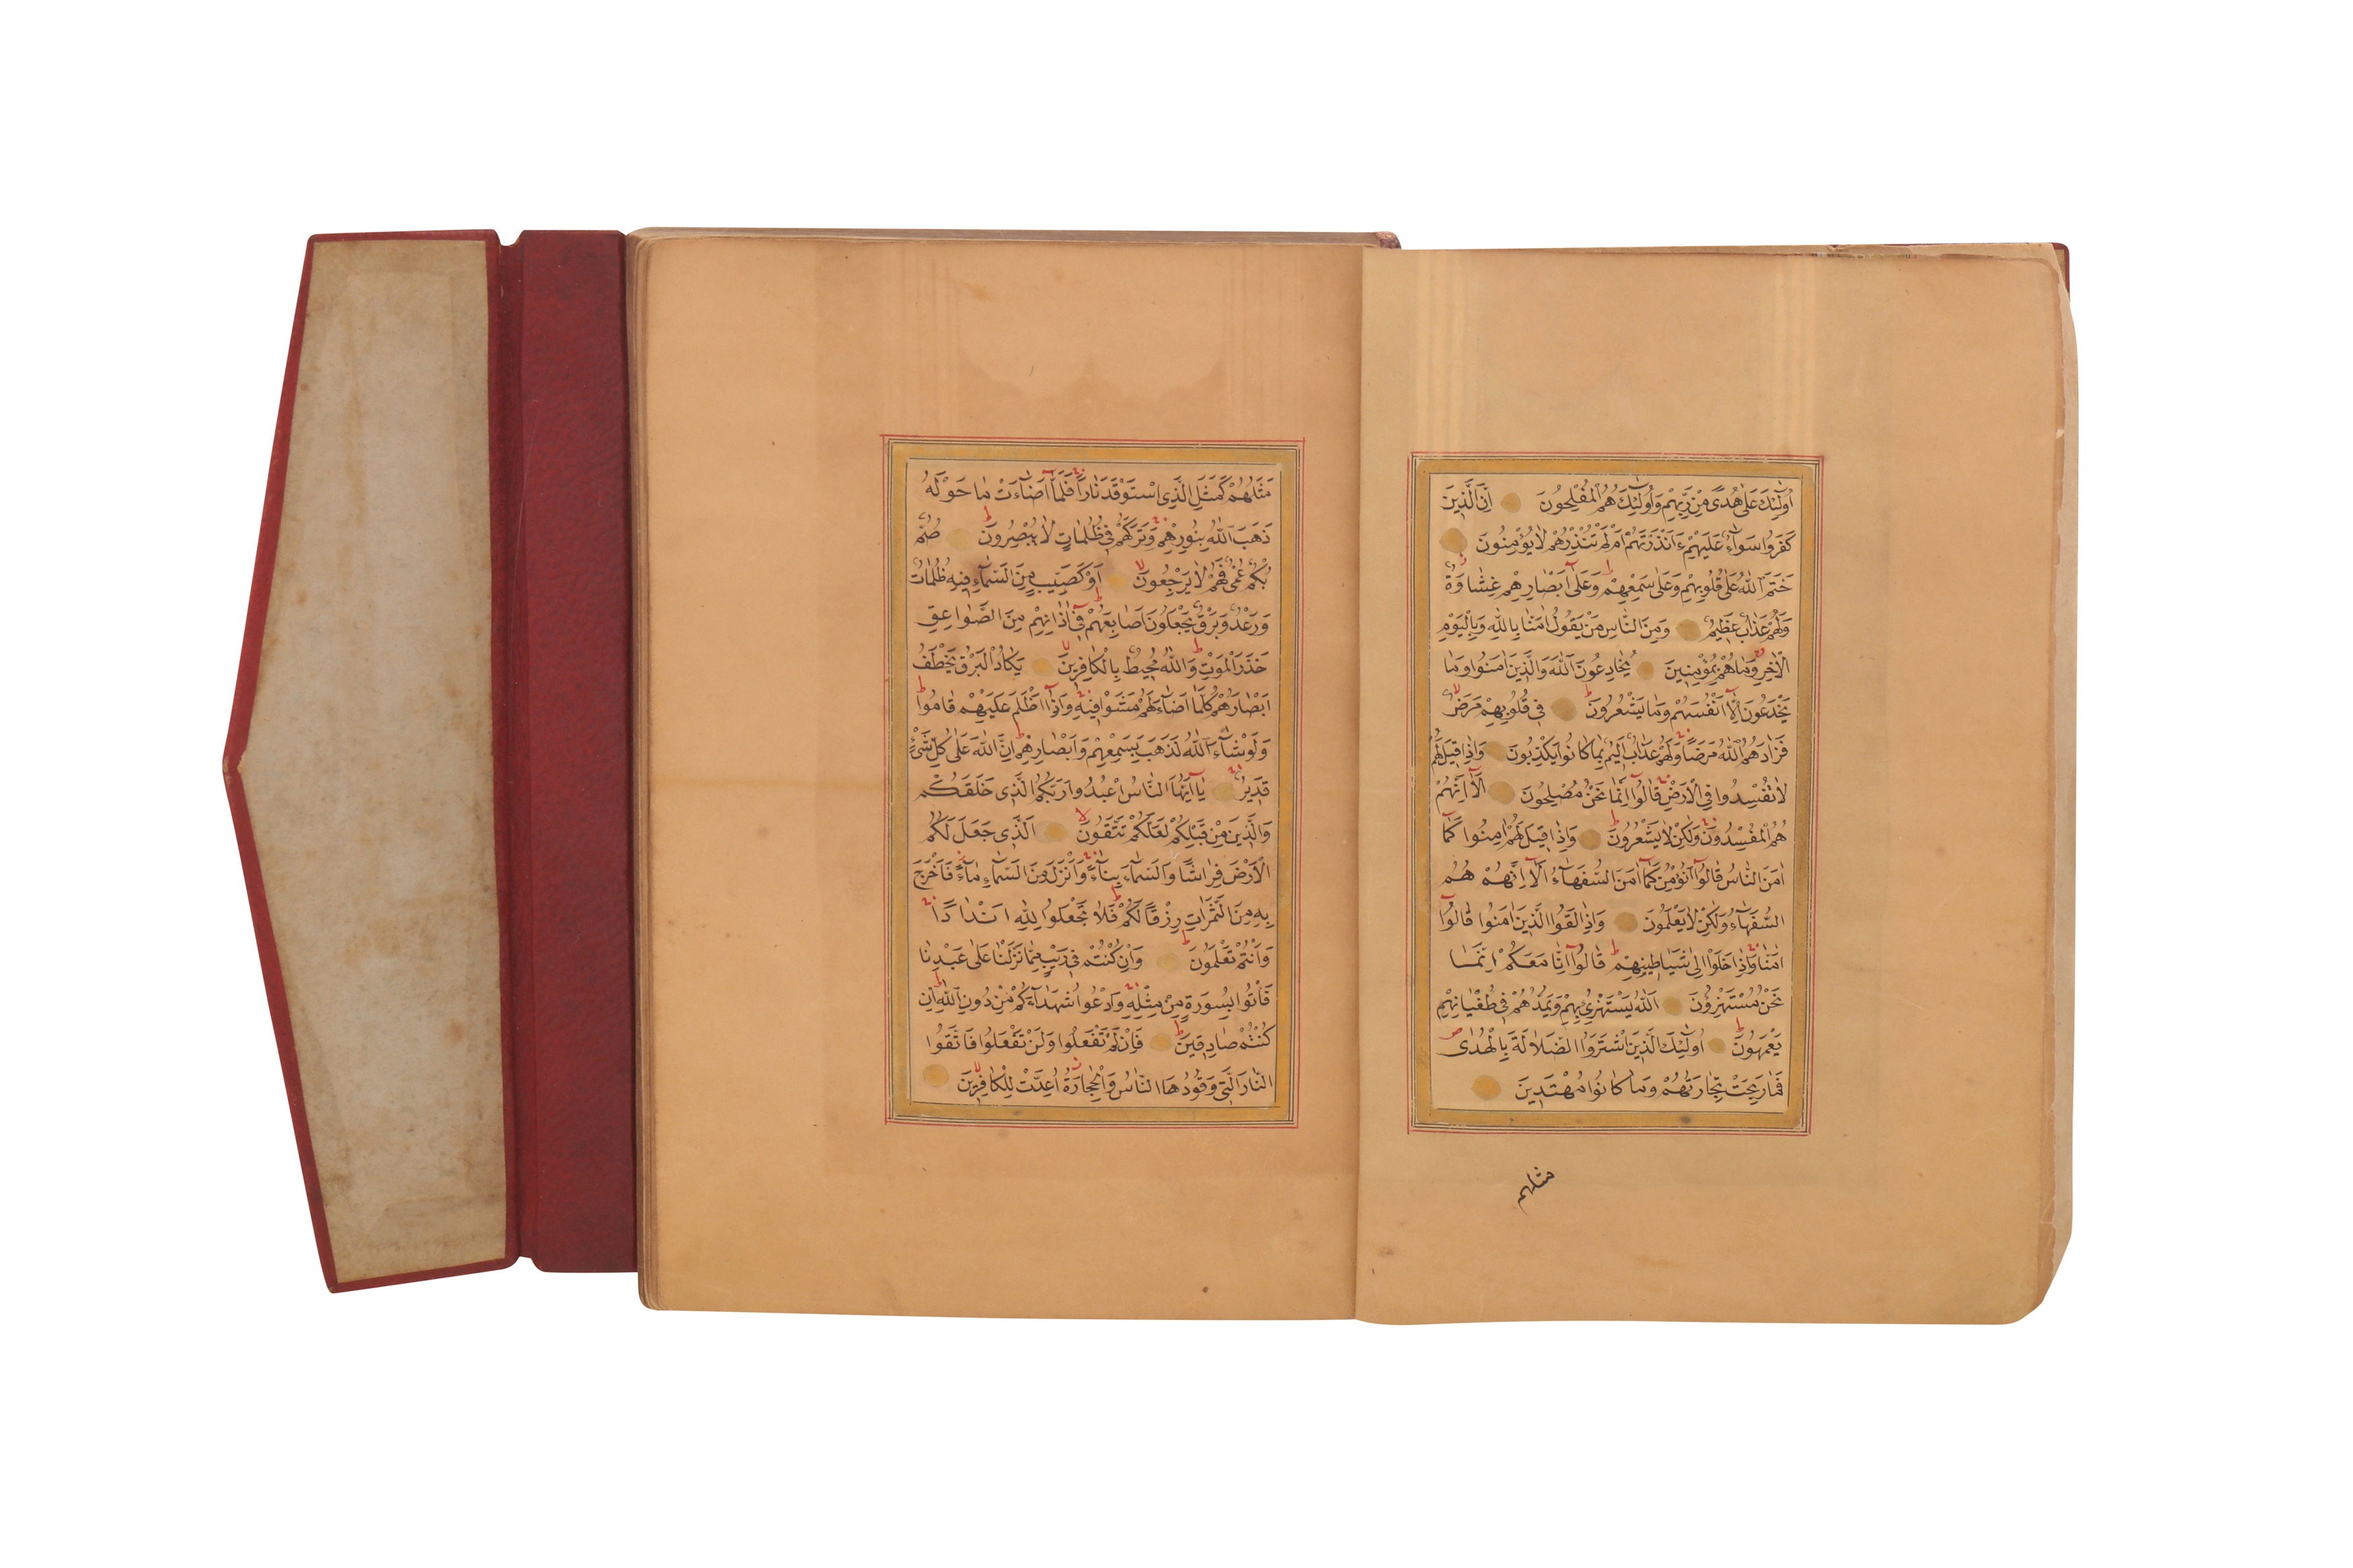 AN ILLUMINATED QUR’AN, OTTOMAN, DATED 1228AH (1813AD) - Image 2 of 4